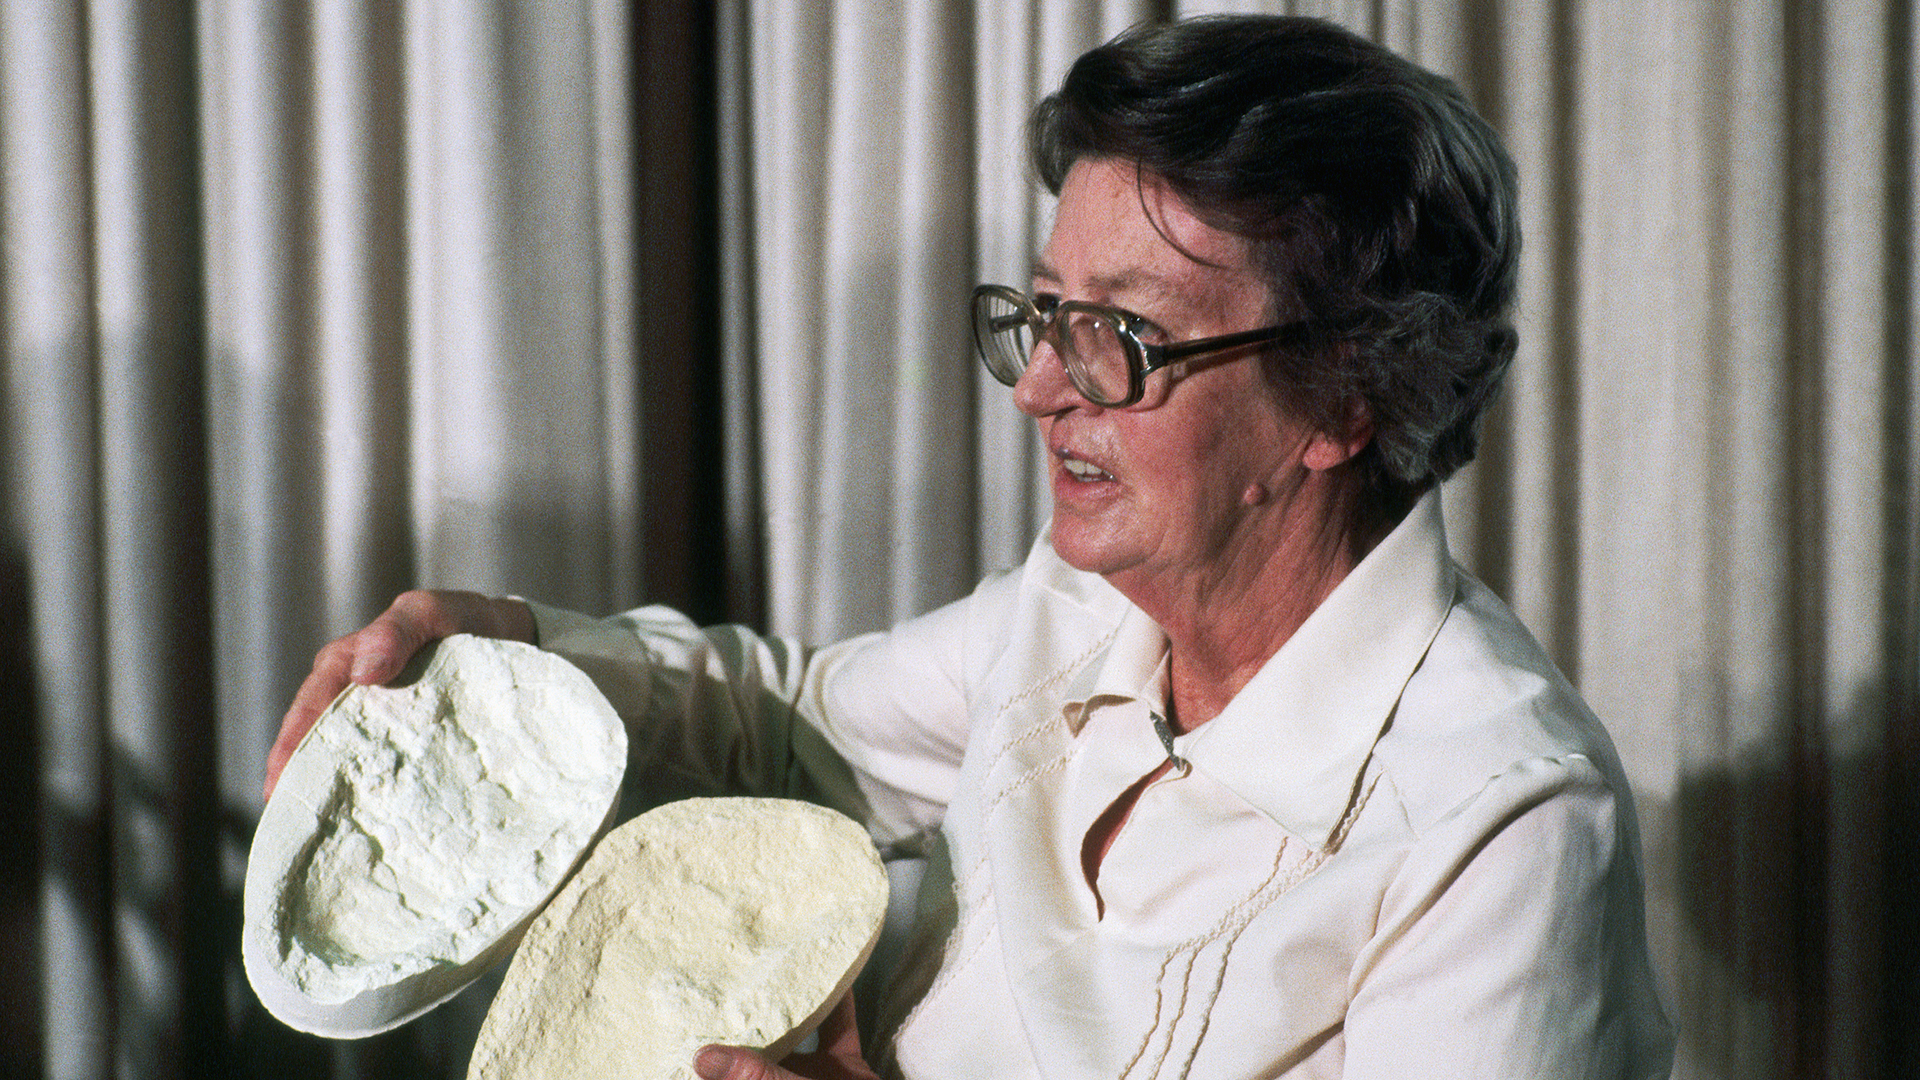 October 6, 1948: Mary Leakey Discovered a Fossil That Established East Africa as the Cradle of Human Beings